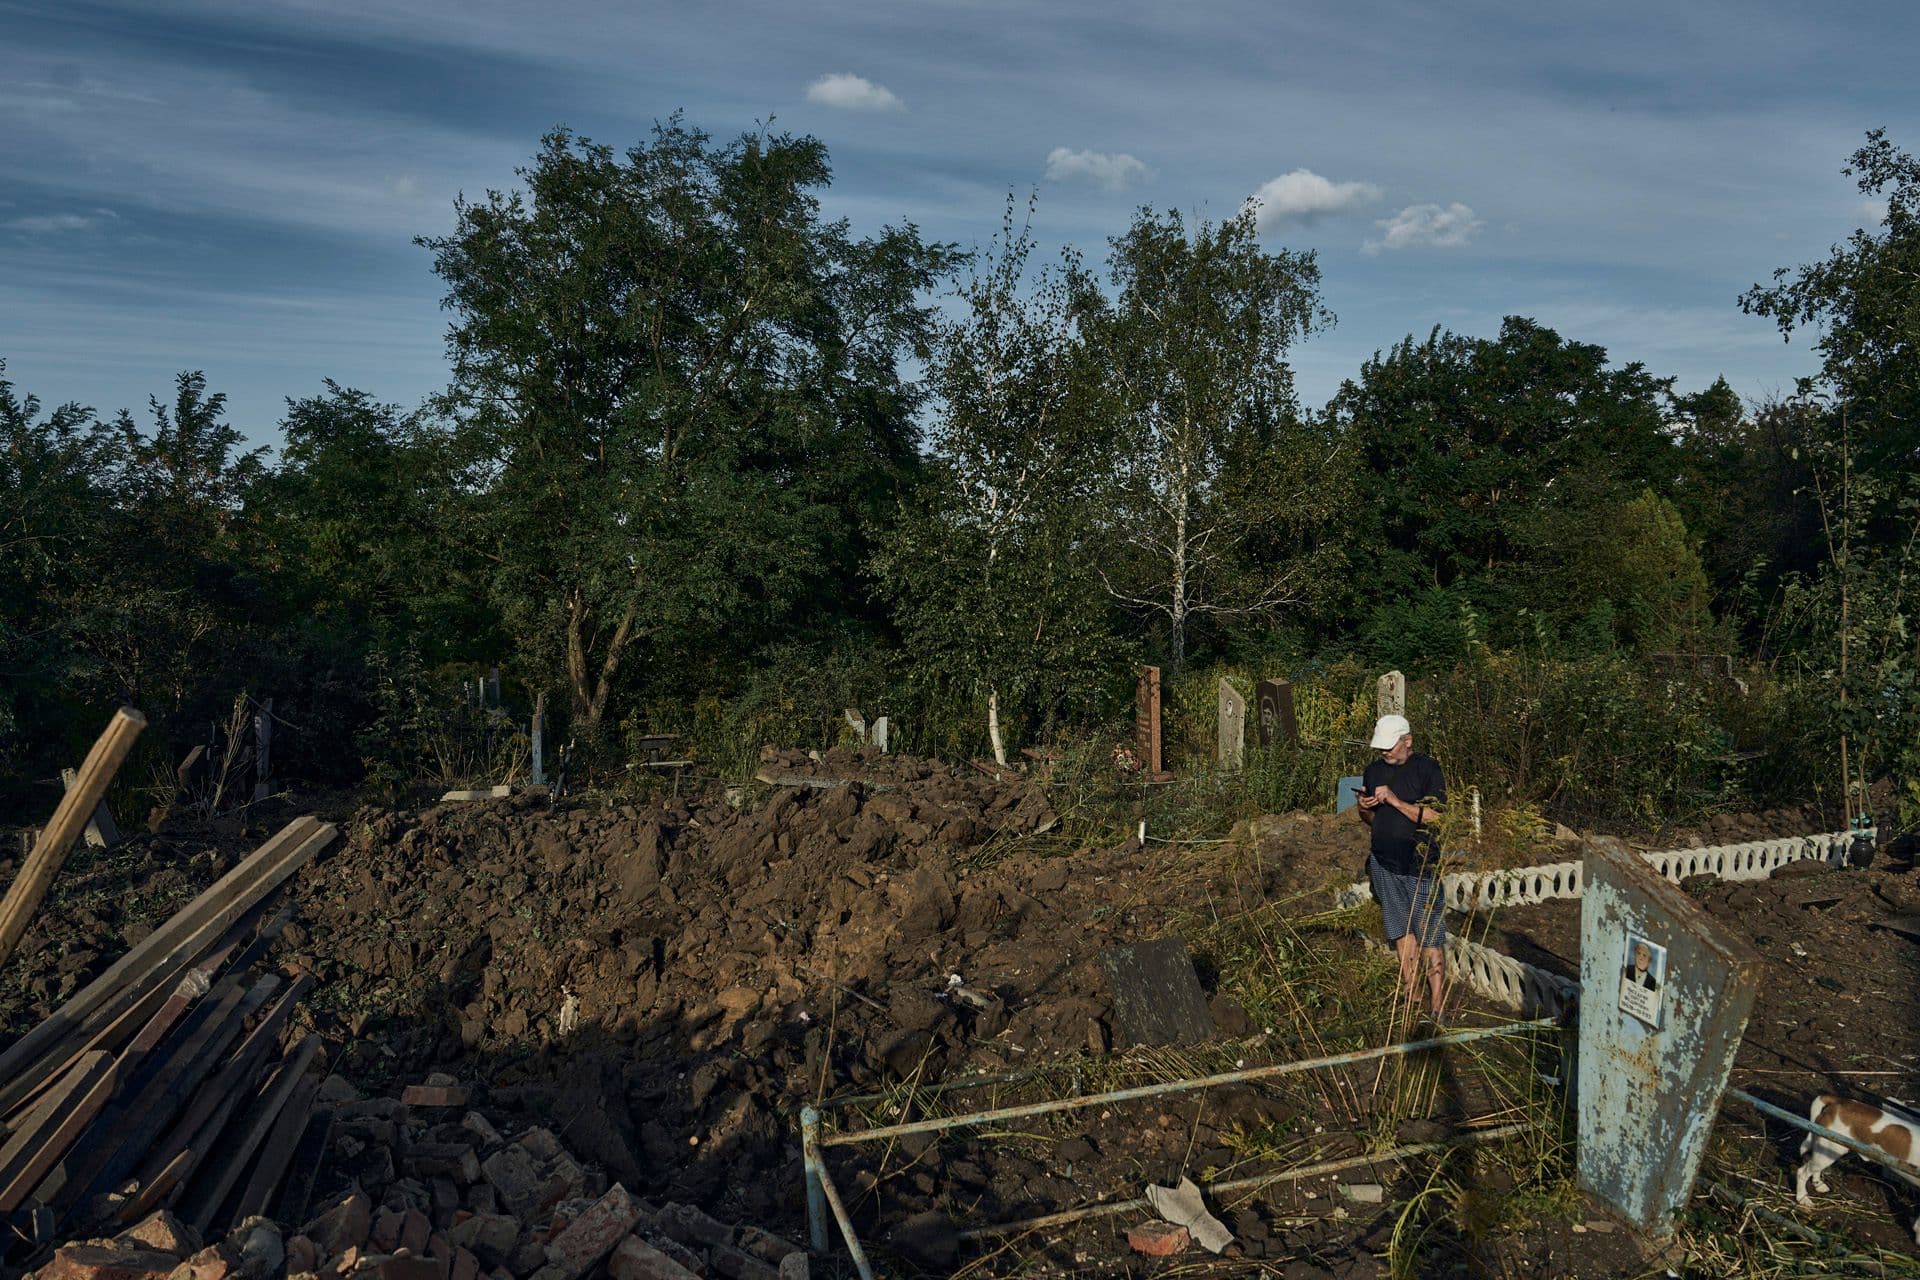 A man looks at a crater caused by a rocket attack at a city cemetery in Kramatorsk